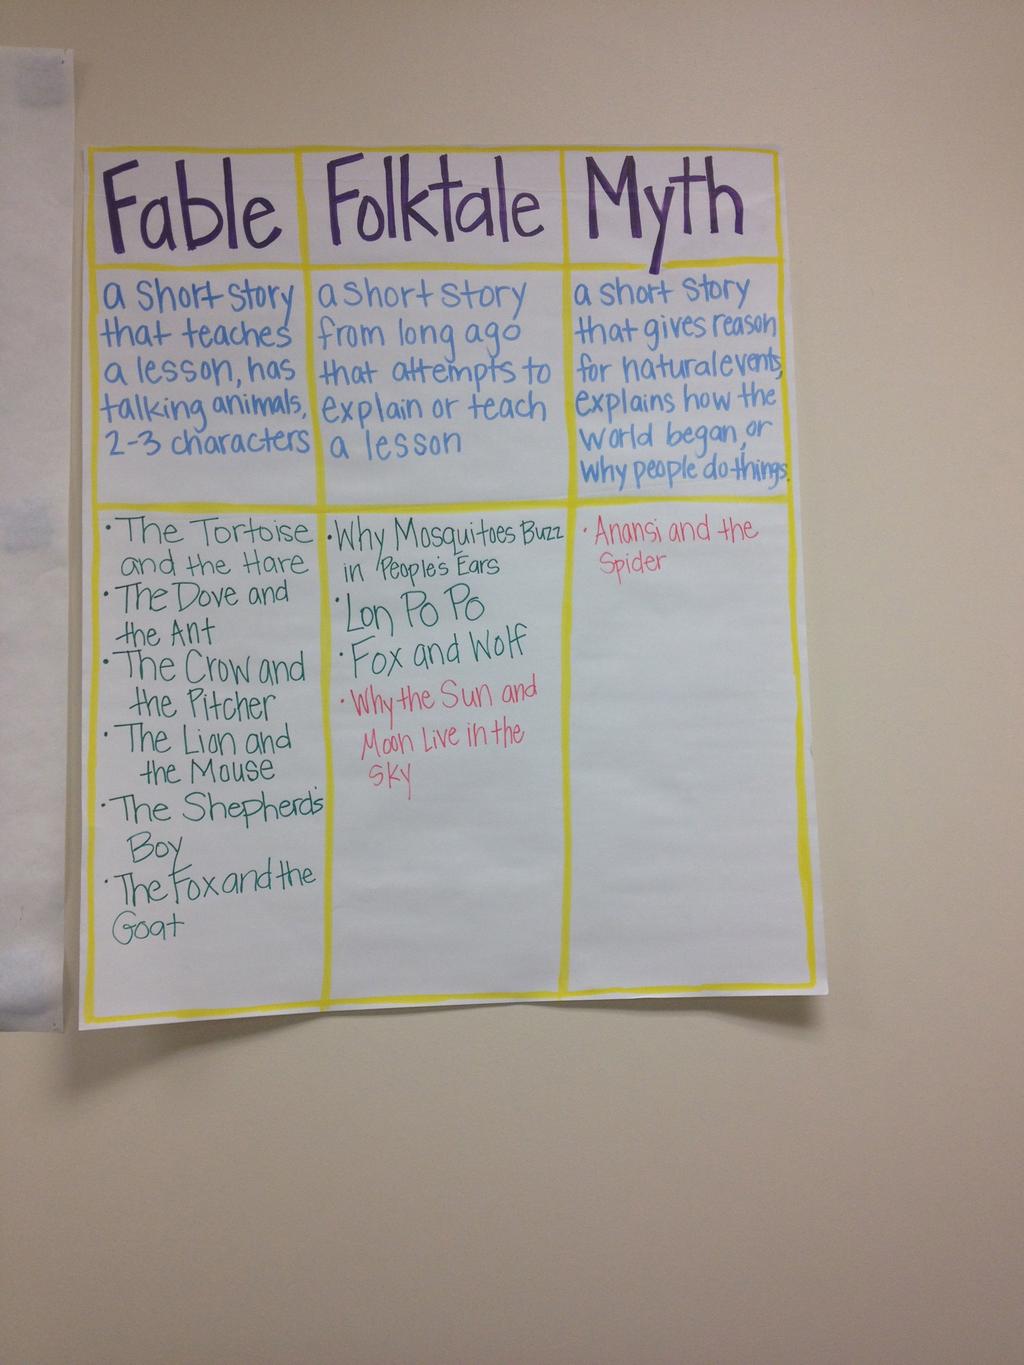 Day 7 SWBAT read a folktale and state the central message or lesson and identify 3-